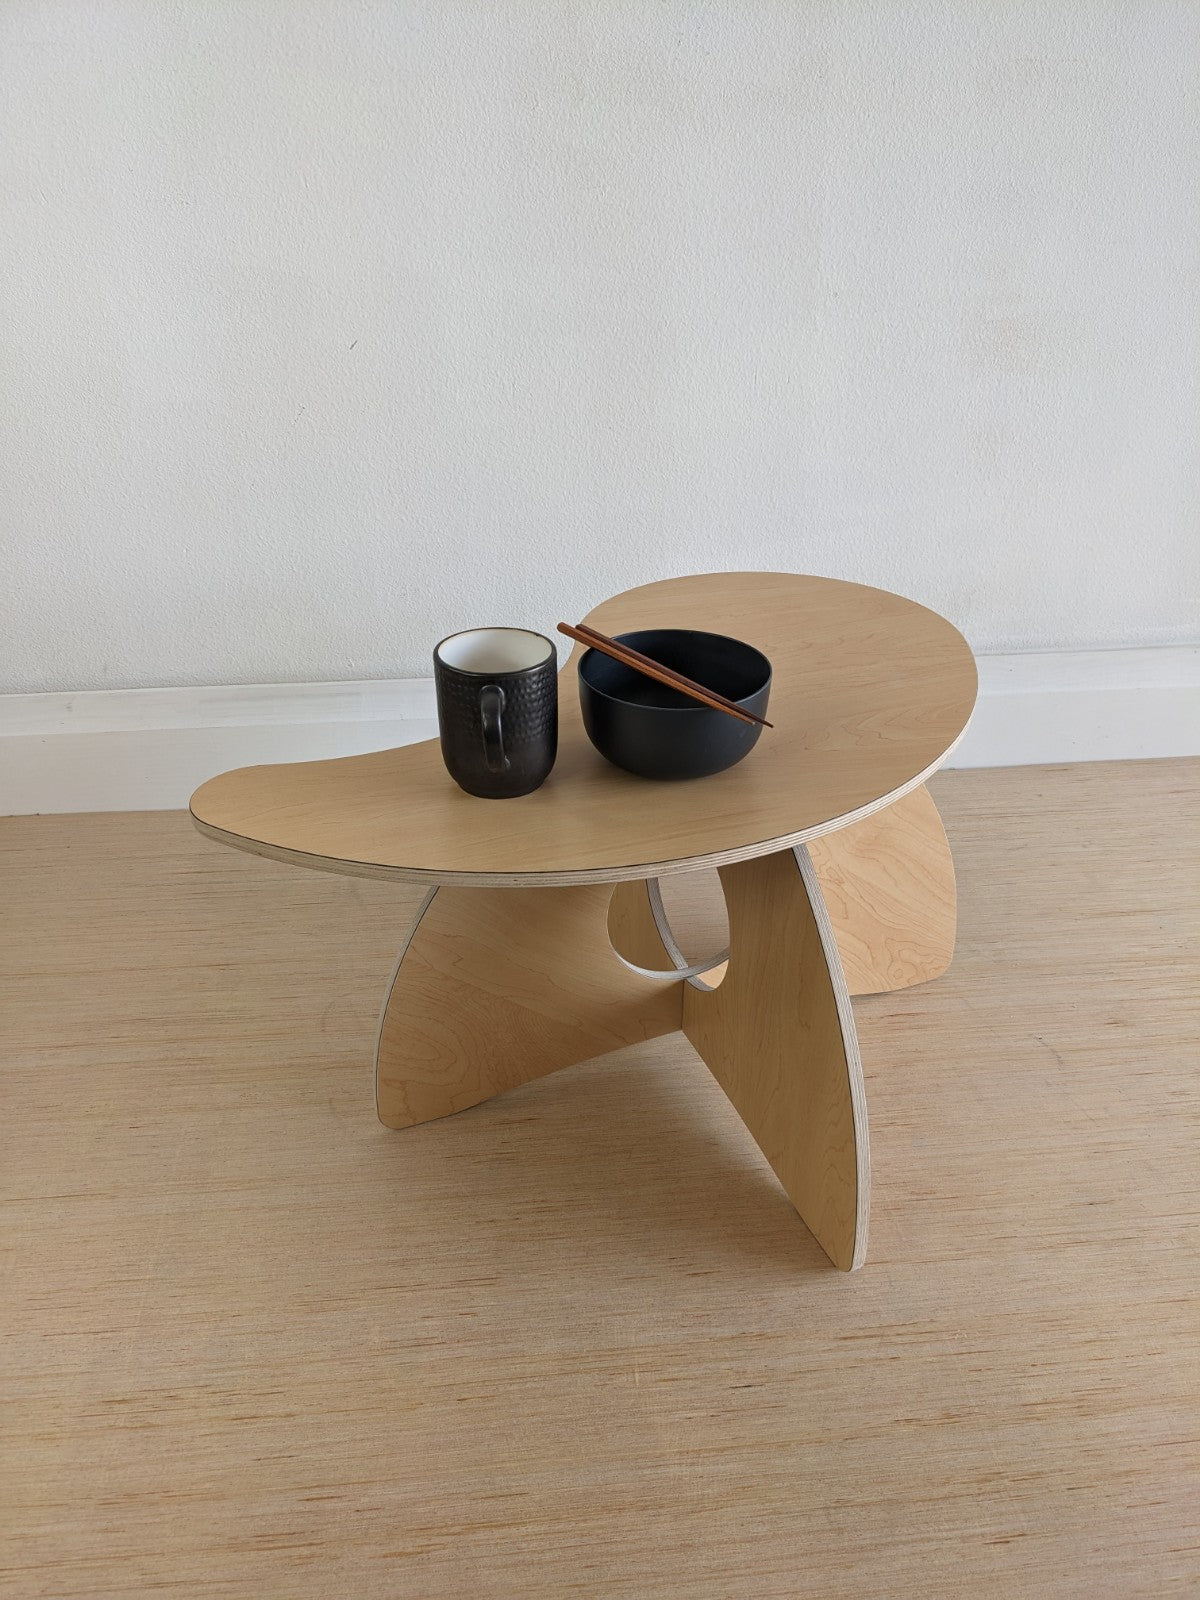 yin table & bench with arc legs